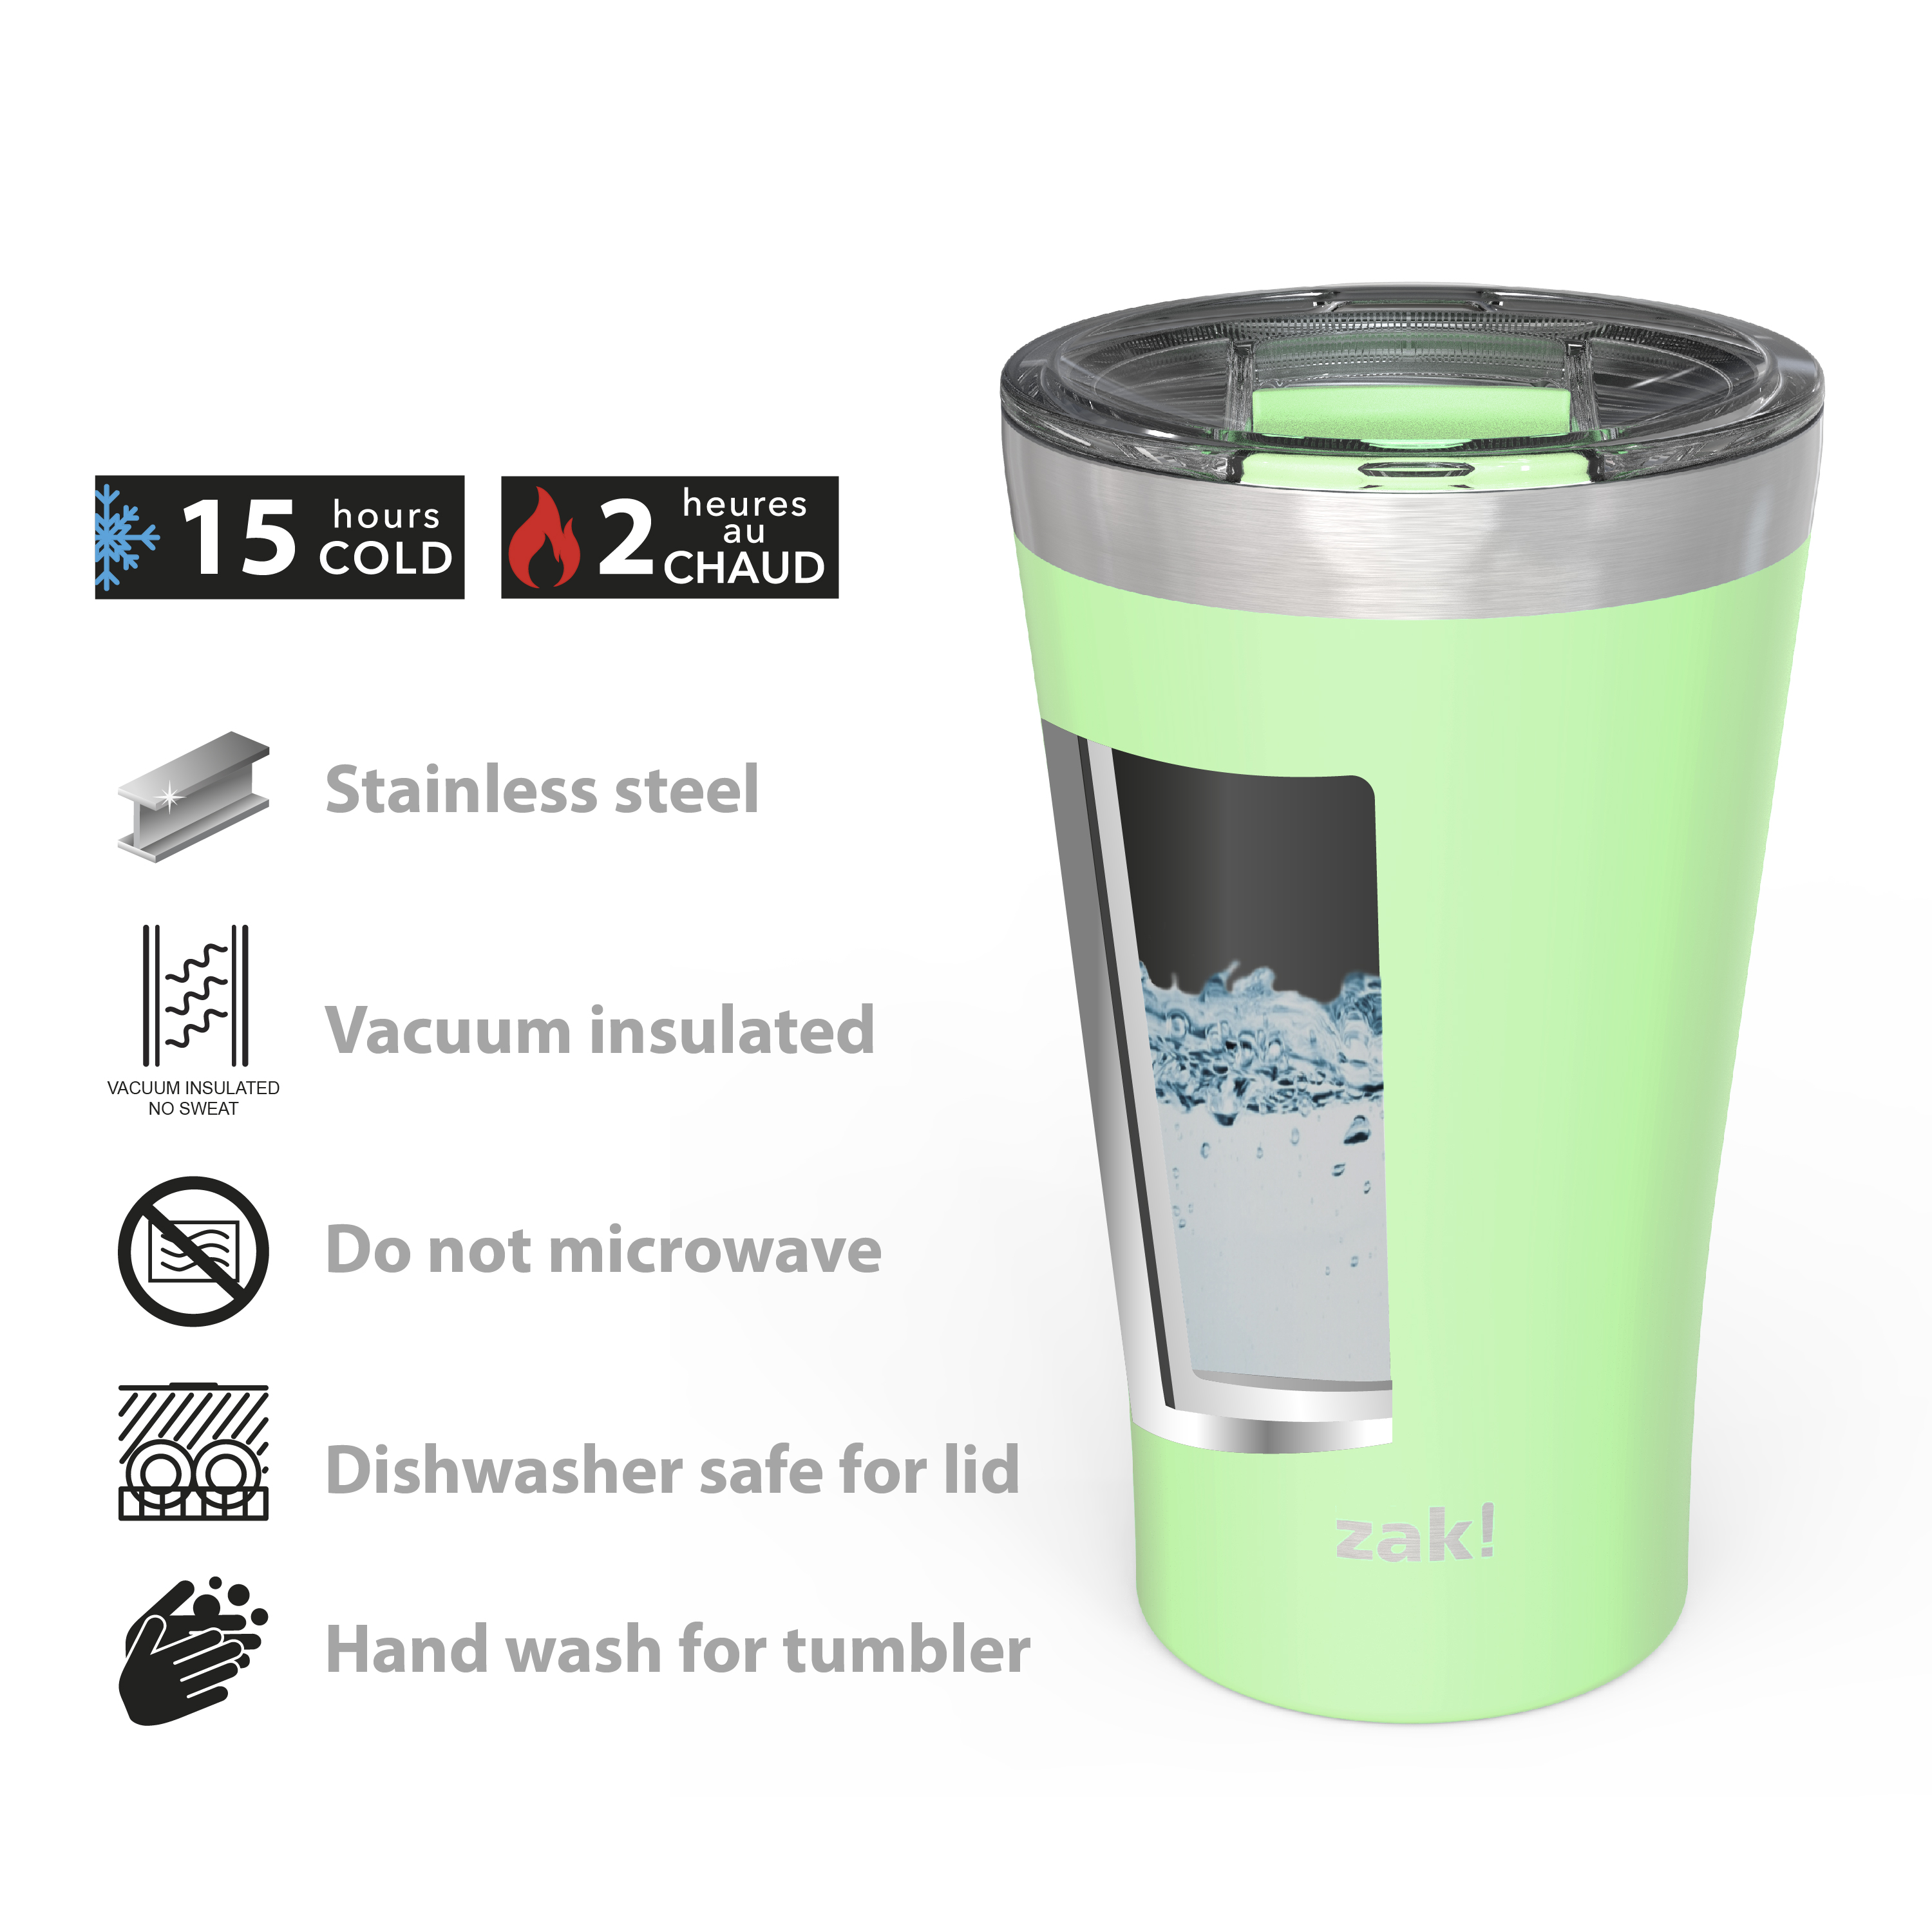 Zak Hydration 20 ounce Reusable Vacuum Insulated Stainless Steel Tumbler with Straw, Neo Mint slideshow image 7